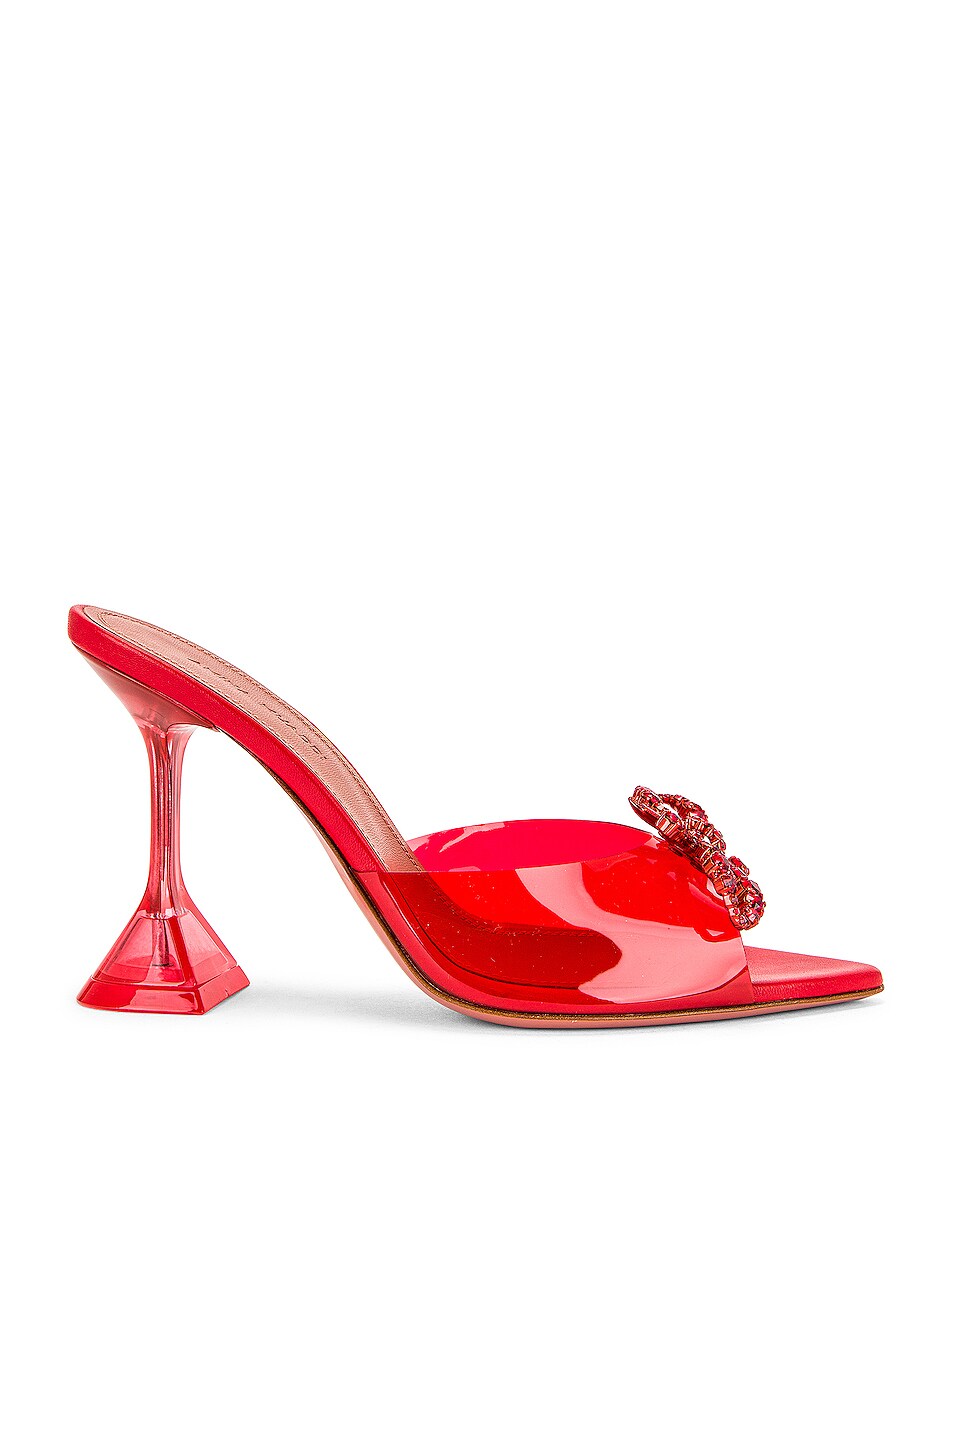 Image 1 of AMINA MUADDI Rosie Glass Slipper in Red & Red Crystal